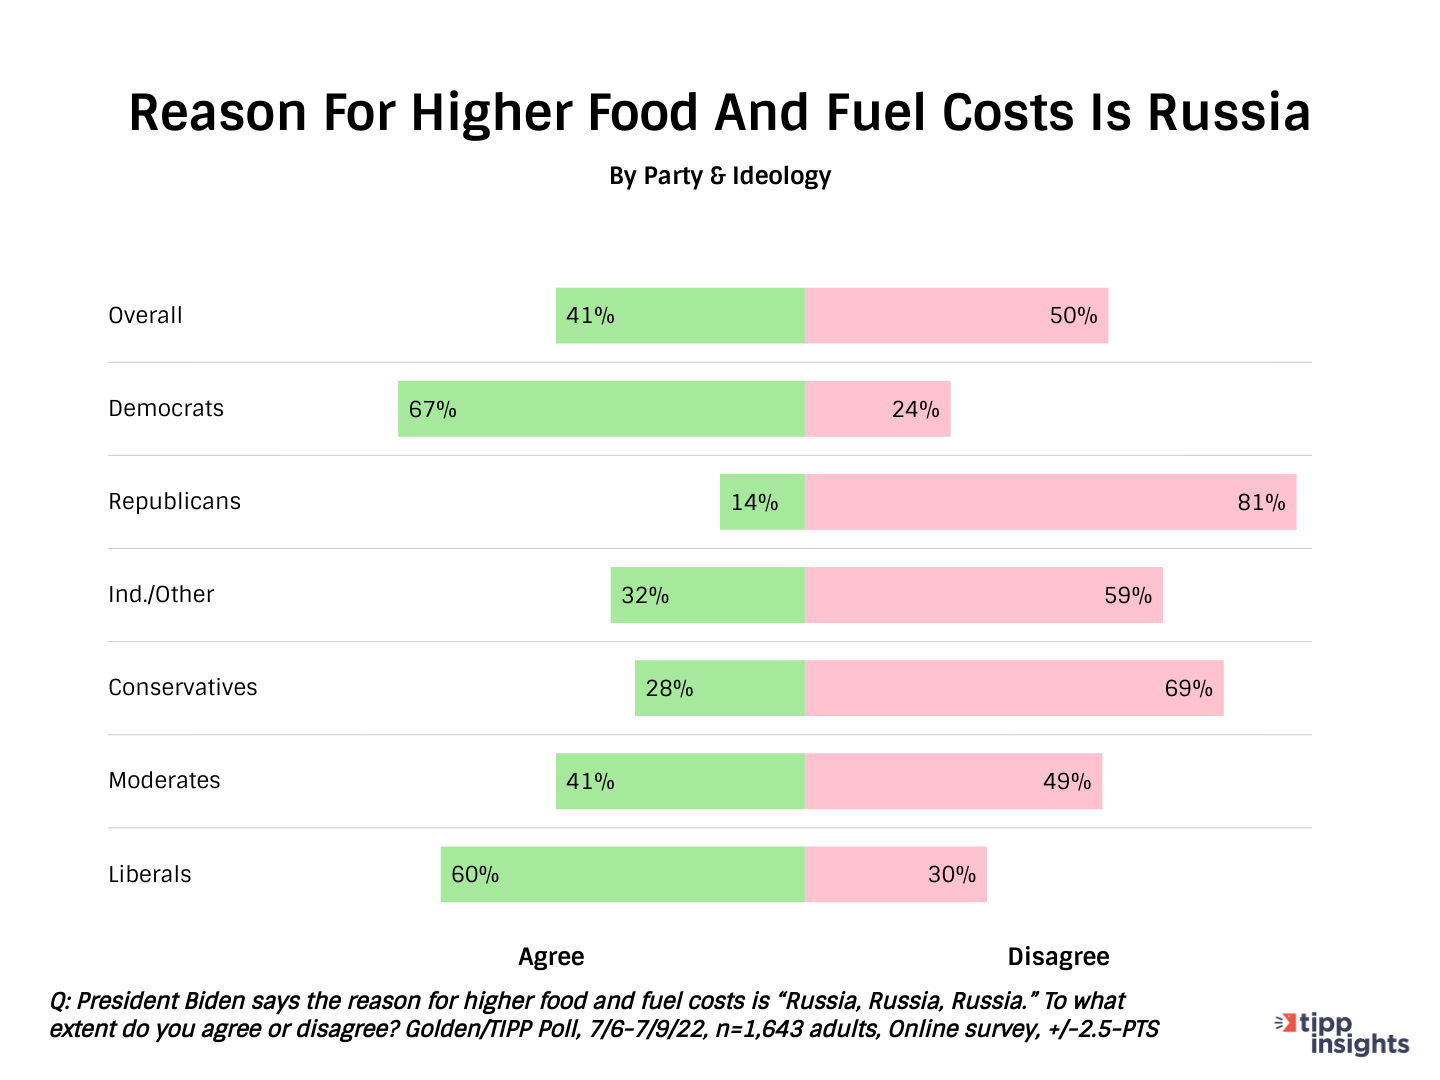 Golden/TIPP Poll Results: Do americans believe it is Russia's fault that food and fuel costs more?